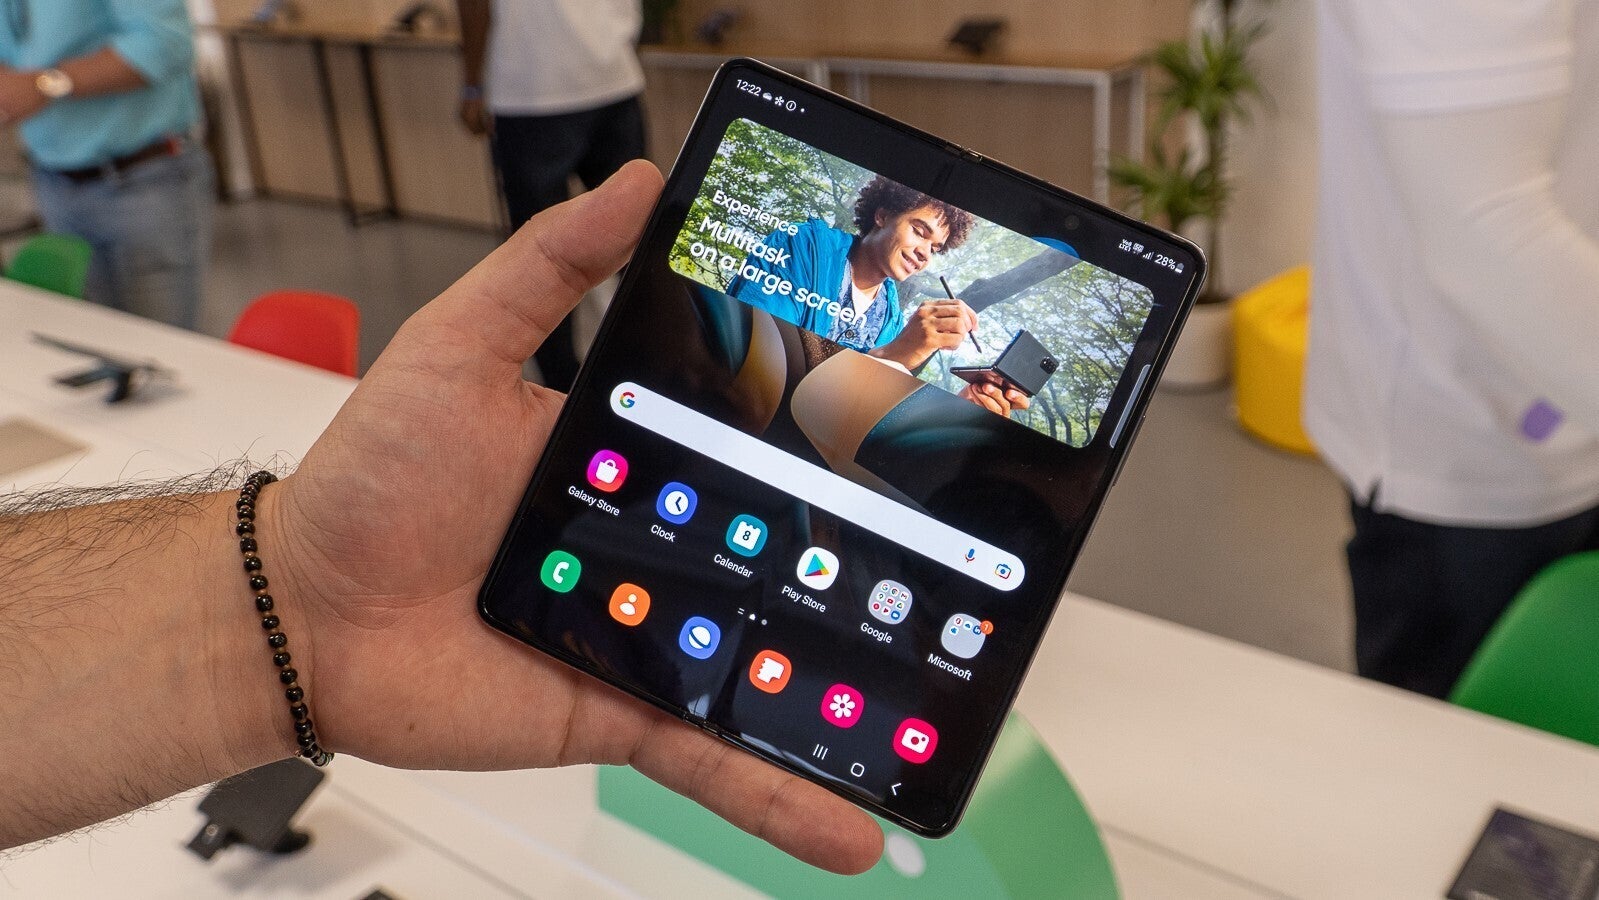 (Image credit - PhoneArena) Galaxy Z Fold 4 display - Samsung Galaxy Z Fold 4 hands-on review